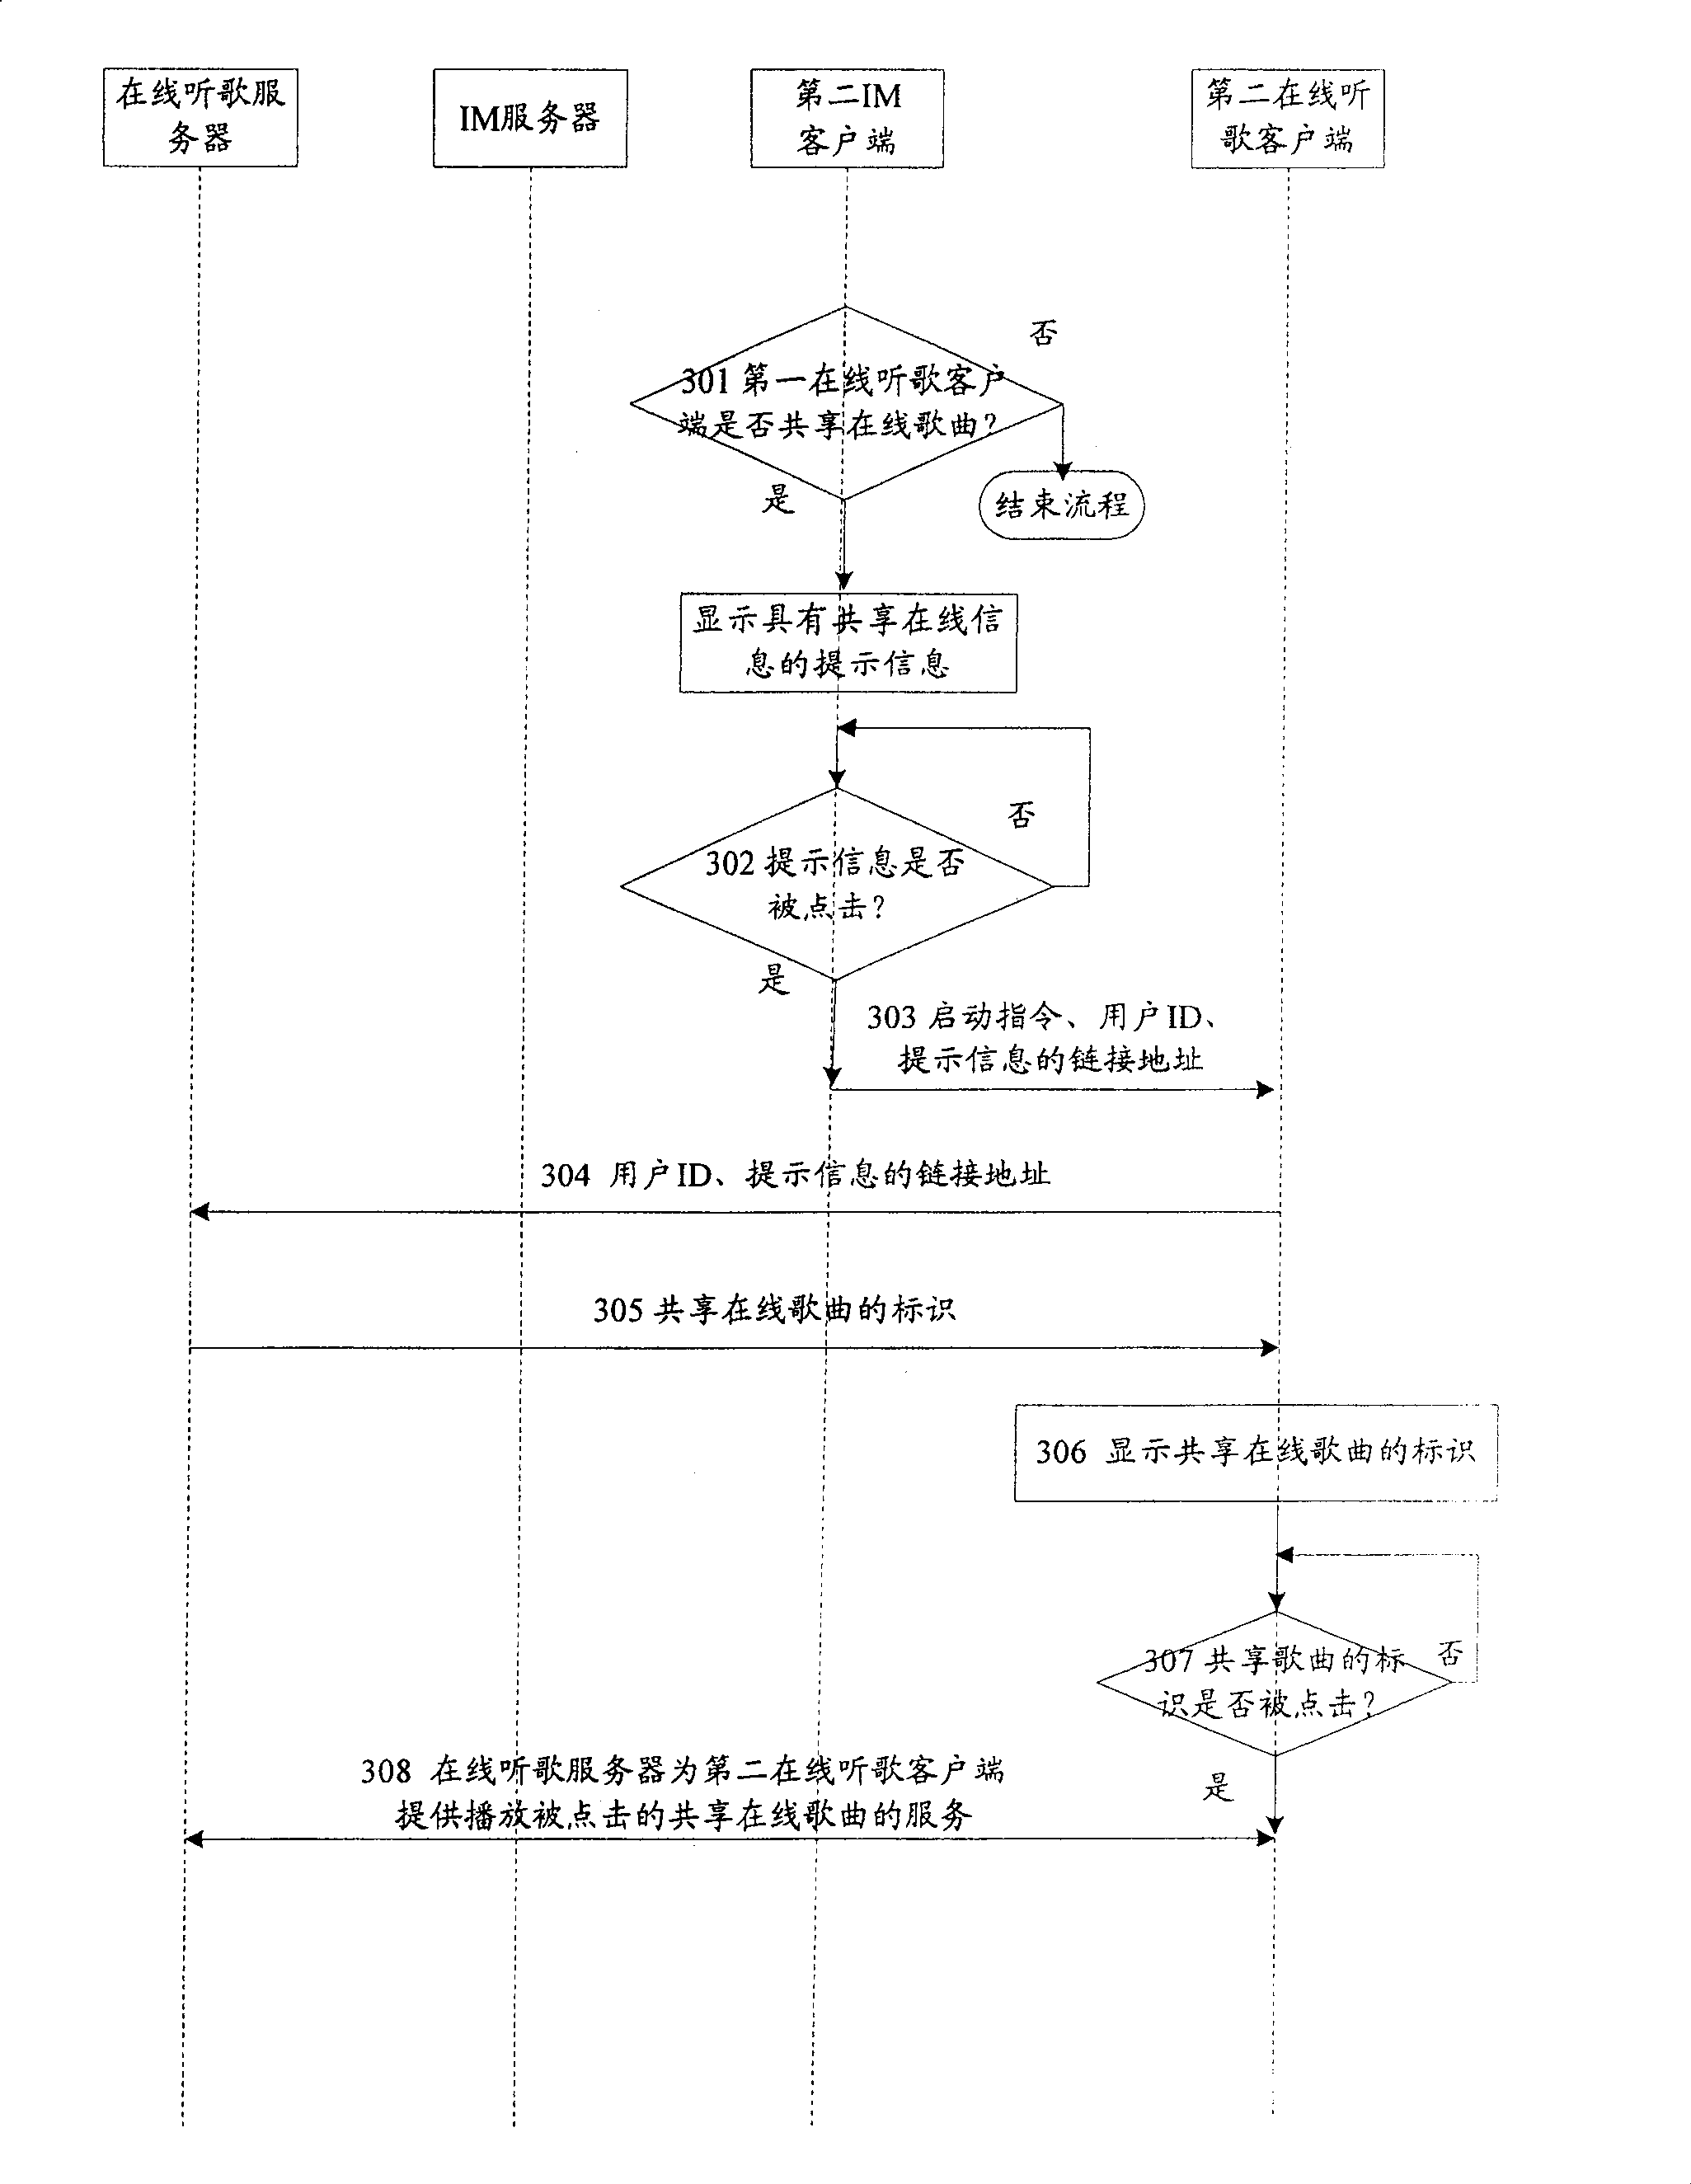 Data transmission and processing method